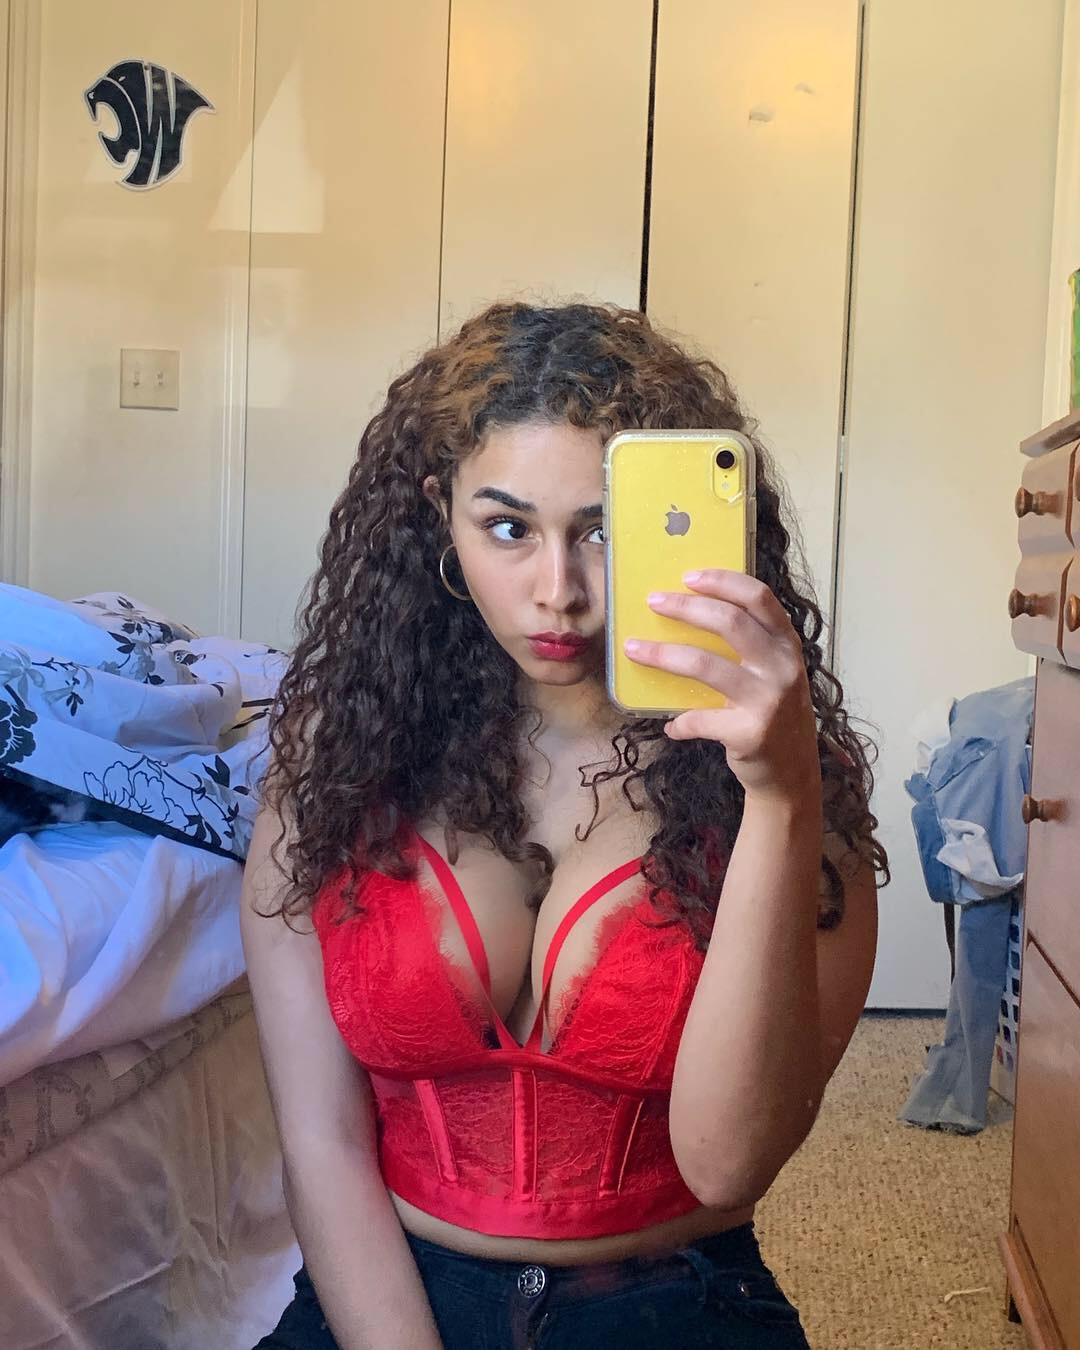 FULL VIDEO: Bri Onepiece12 Nude Onlyfans! 